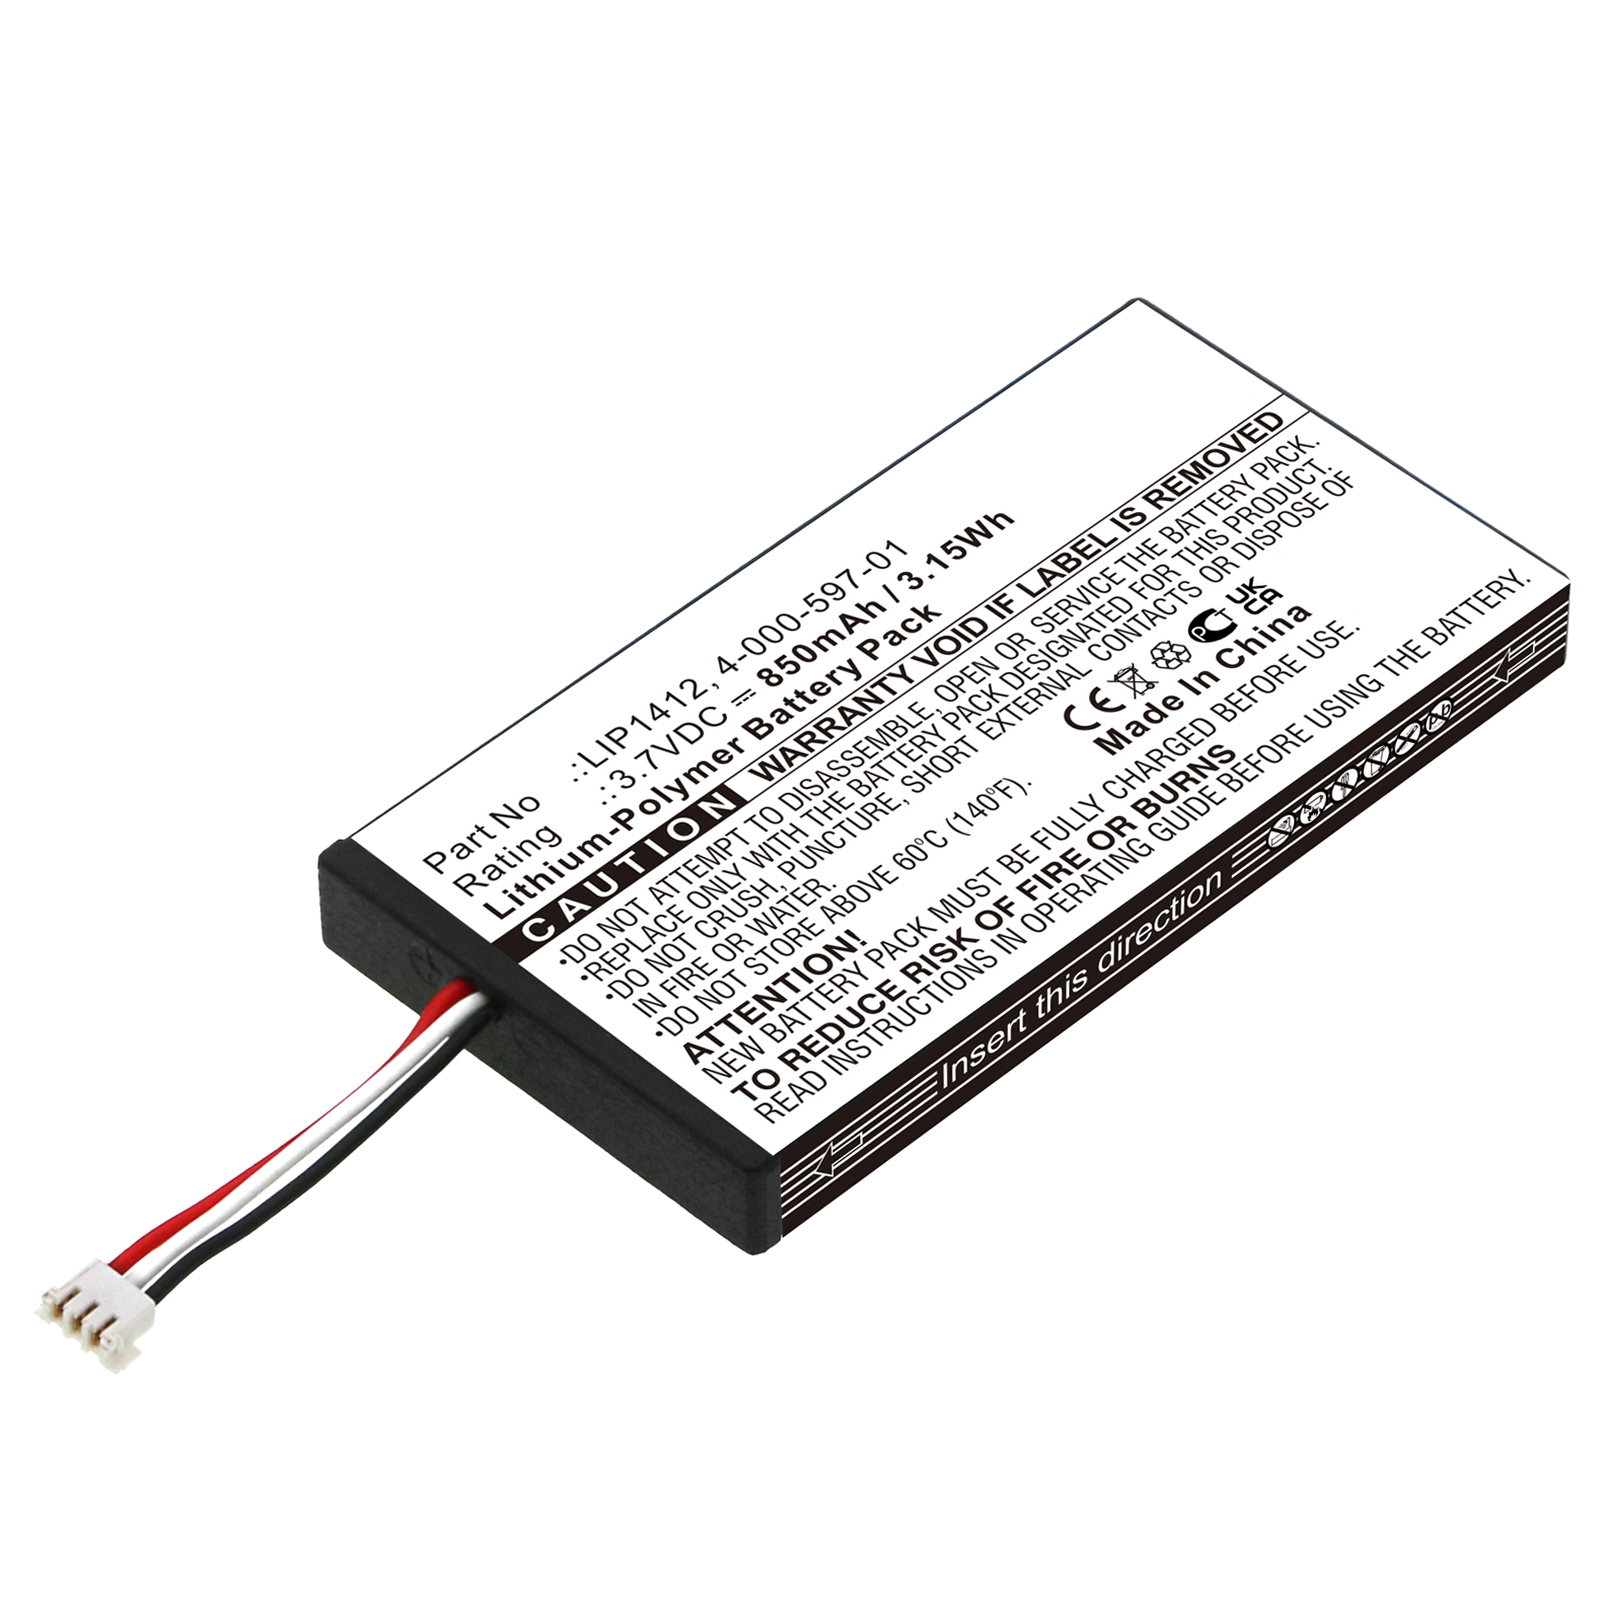 Synergy Digital Battery Compatible With Sony 4-000-597-01 Replacement Battery - (Li-Pol, 3.7V, 850 mAh)